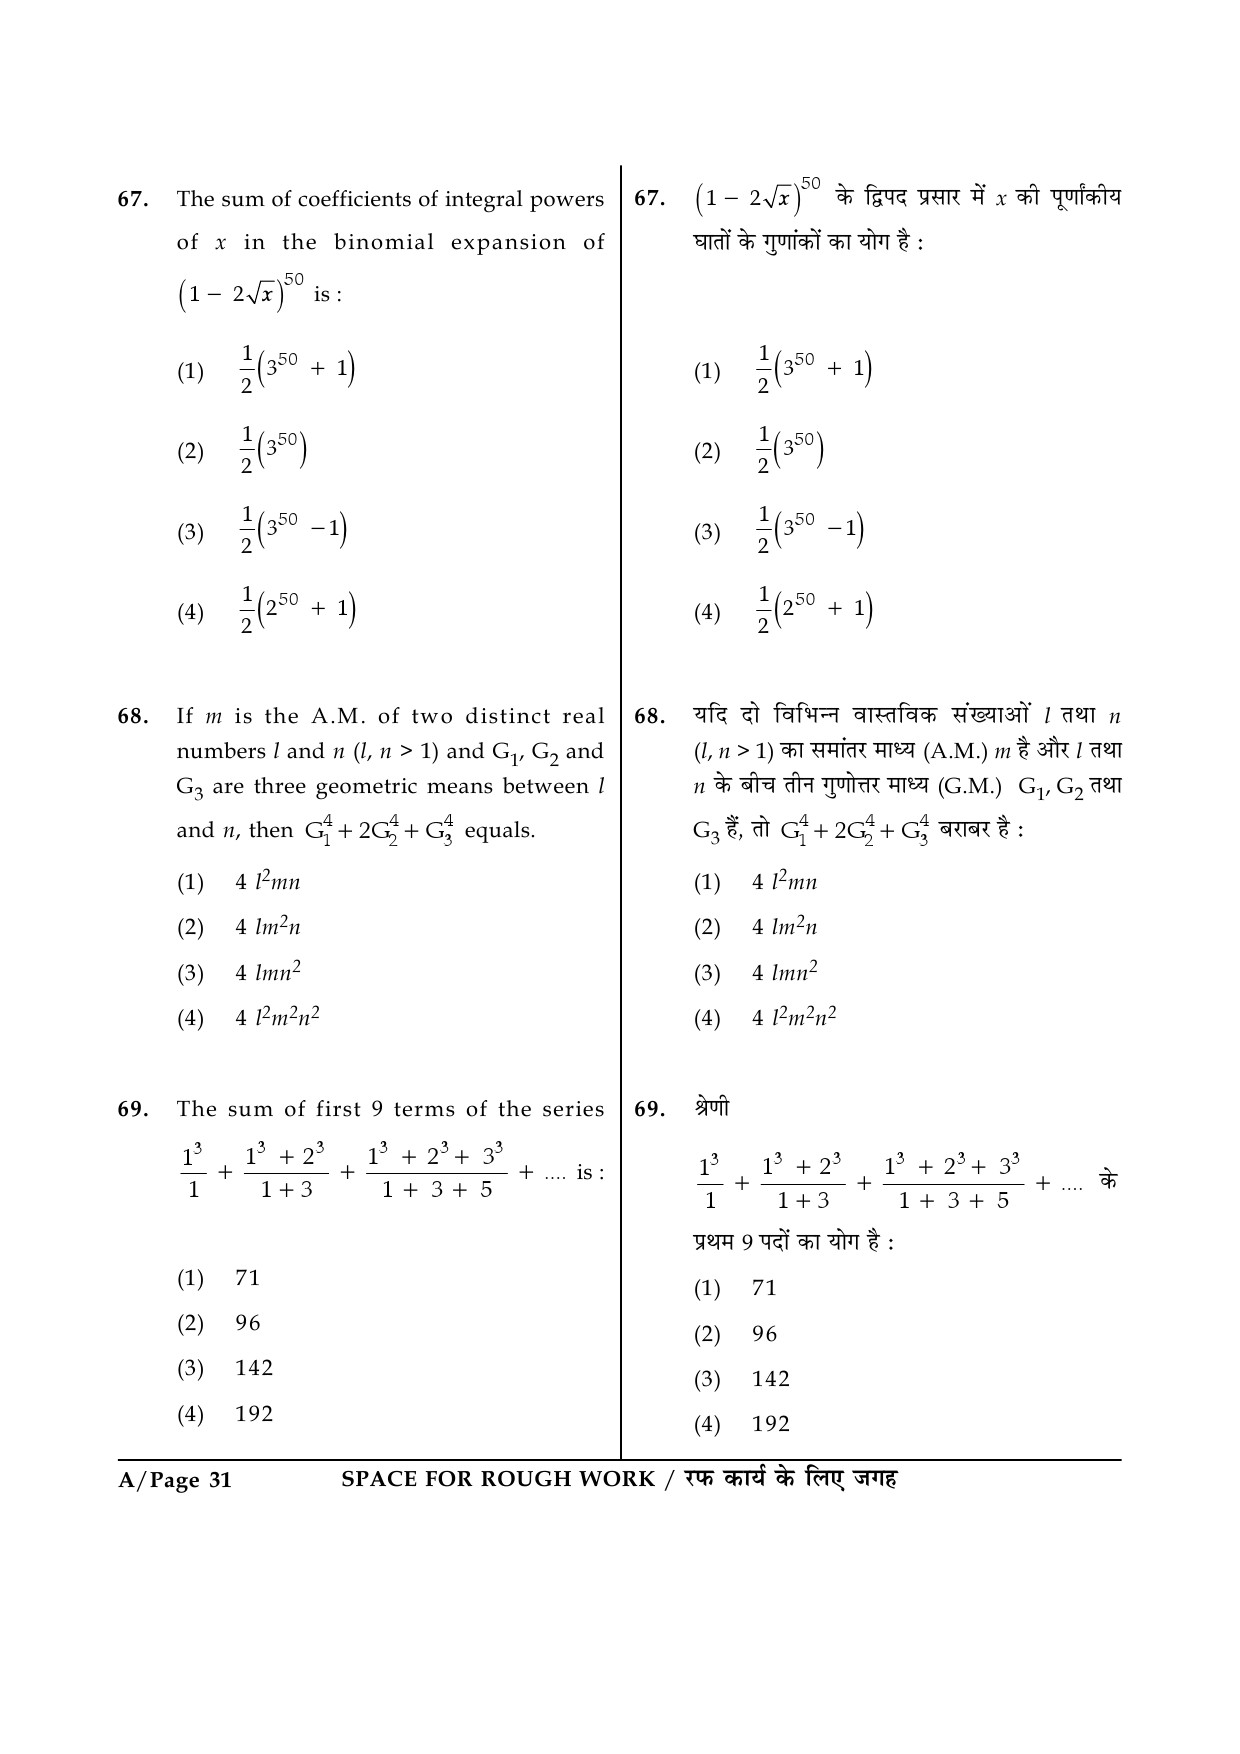 JEE Main Exam Question Paper 2015 Booklet A 31